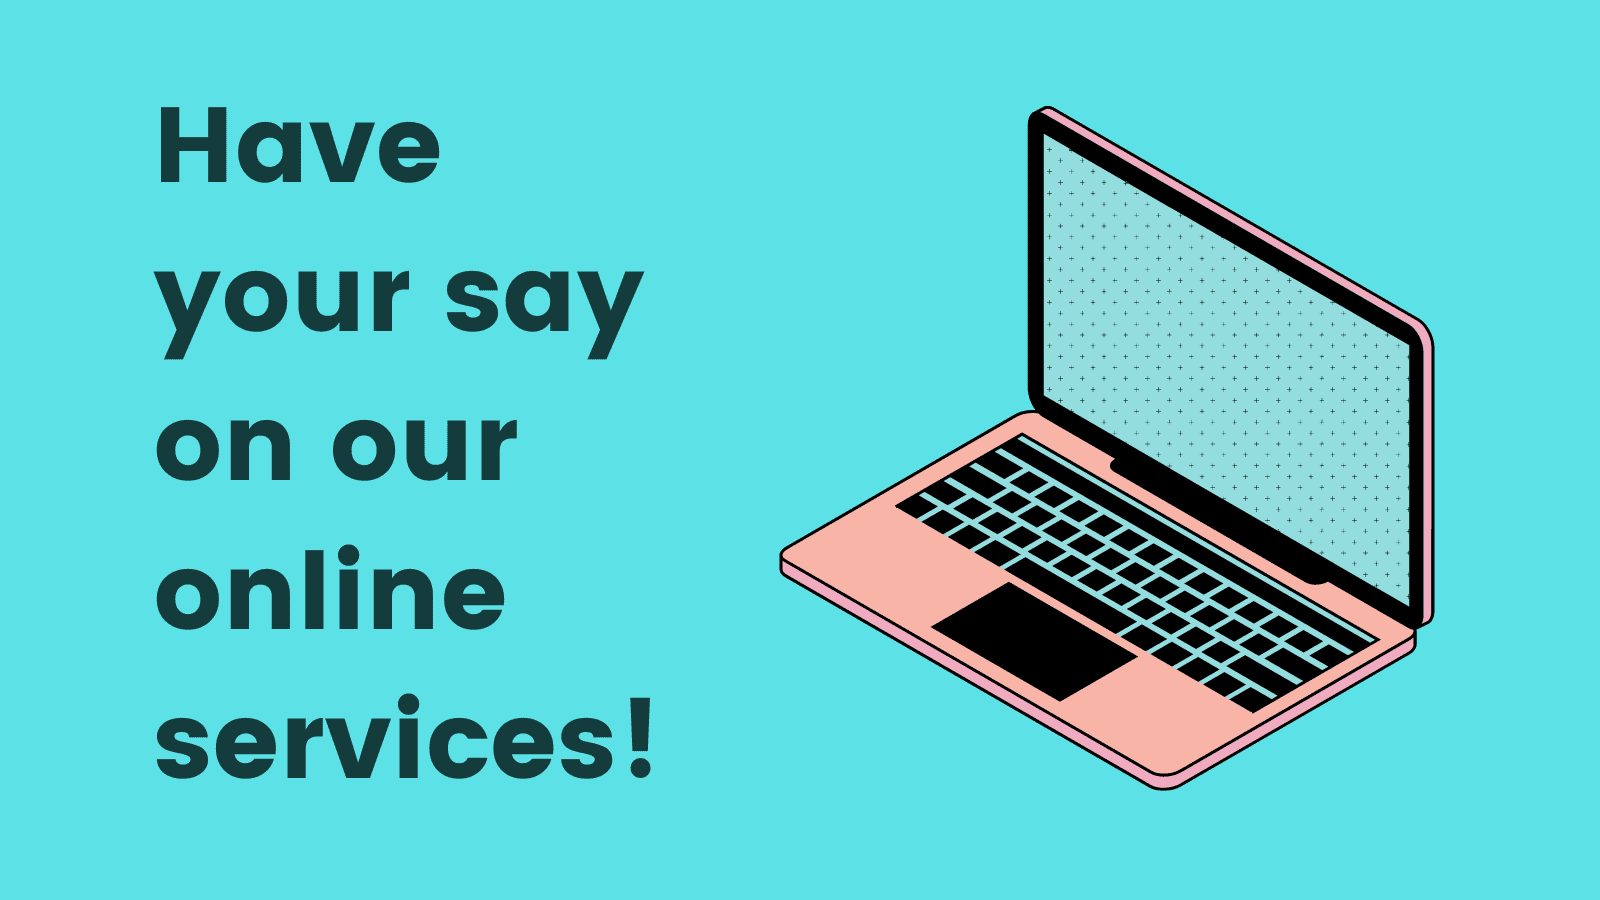 Don’t miss your chance to have your say on our online services